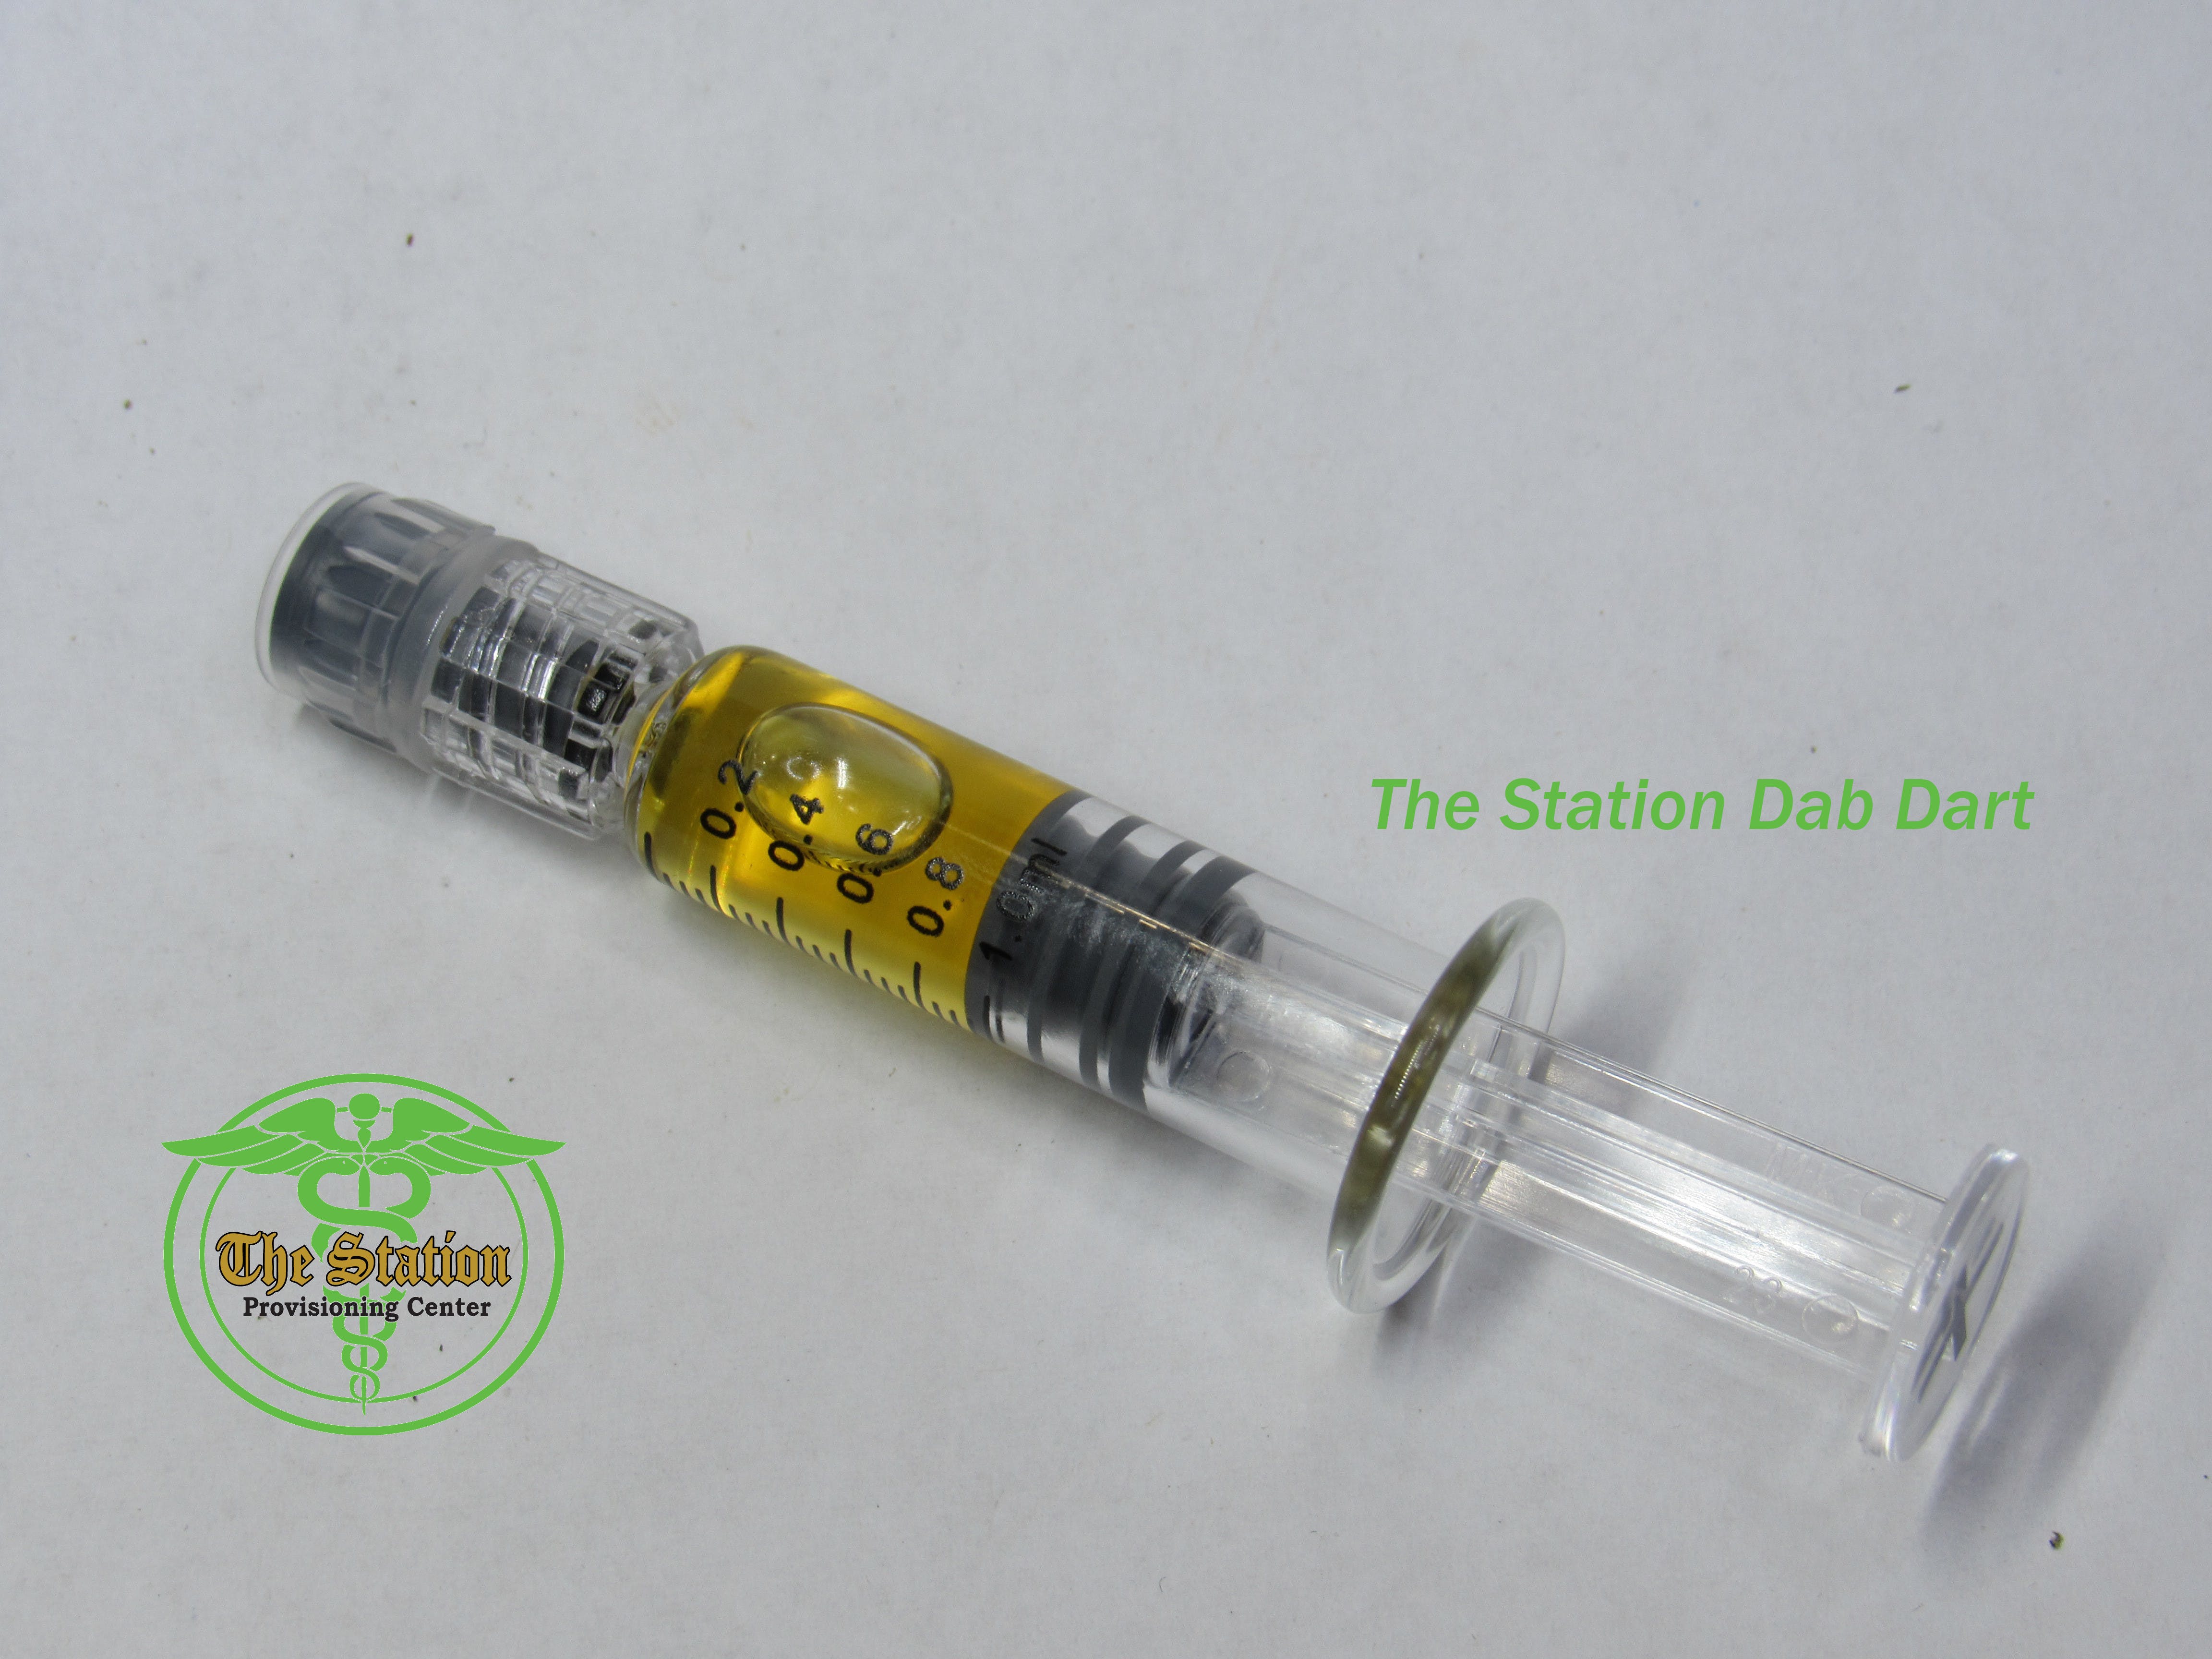 concentrate-the-station-dab-dart